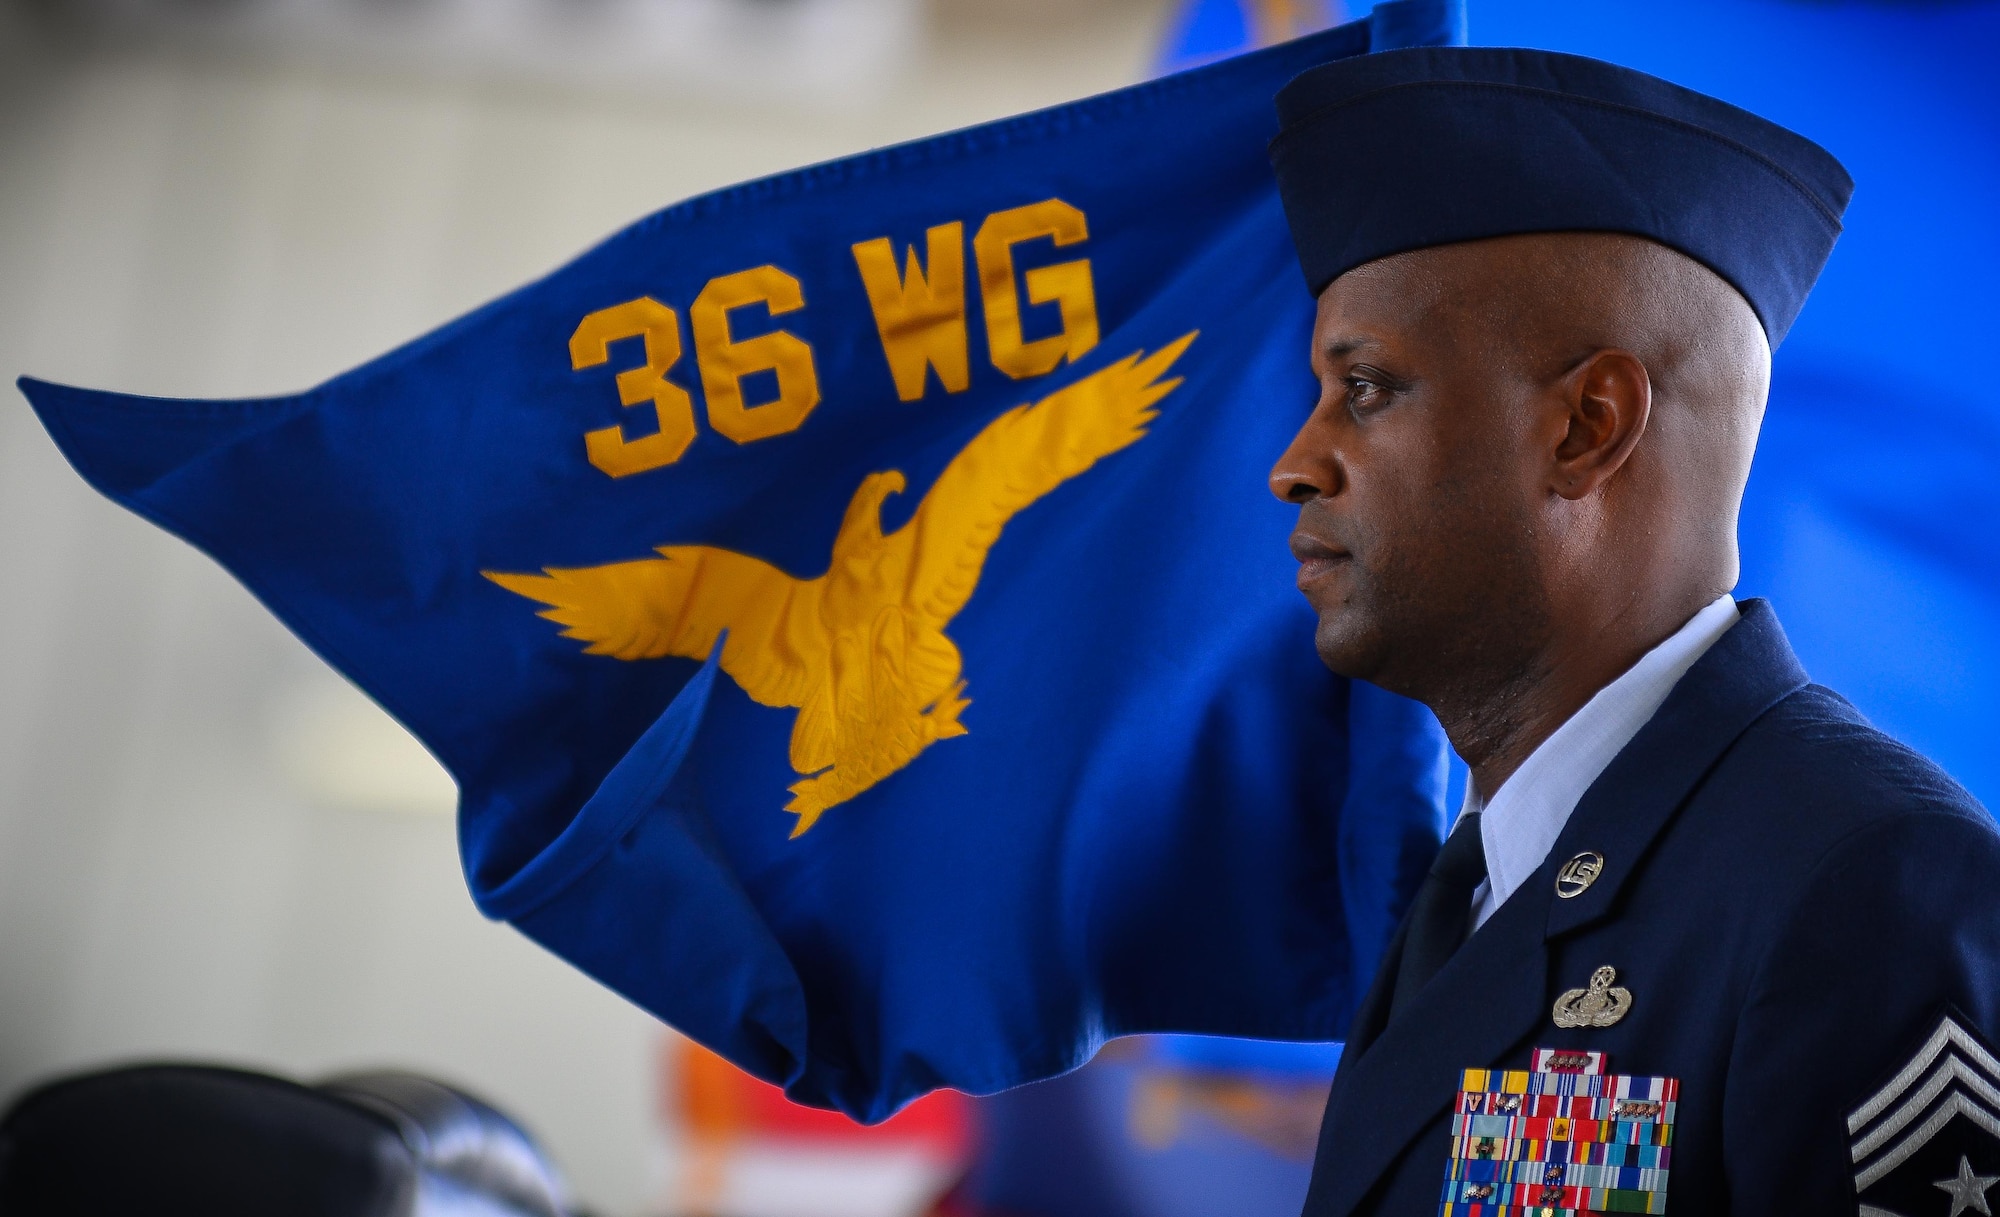 Chief Master Sgt. Michael McMillan, 36th Wing command chief, stands with the wing guidon during a change in command ceremony May 6, 2016, at Andersen AIr Force Base, Guam. The ceremony marked the transfer of command from Brig. Gen. Andrew Toth to Brig. Gen. Douglas Cox. (U.S. Air Force photo by Staff Sgt. Alexander W. Riedel)